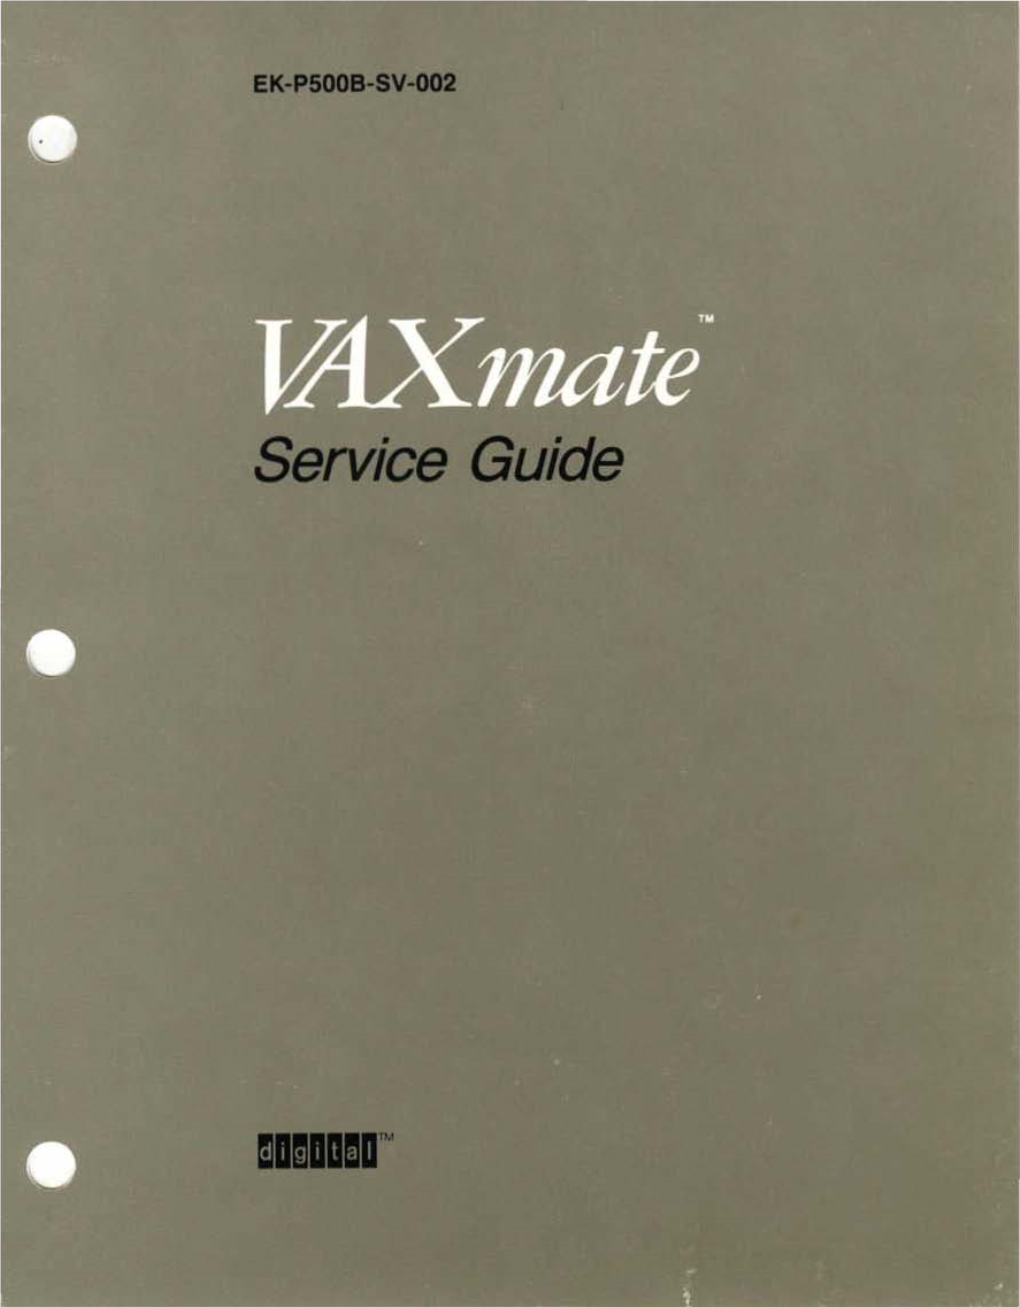 Service Guide Mate TM Service Guide ~Eptember 1986 May 1987 © Digital Equipment Corporation 1987